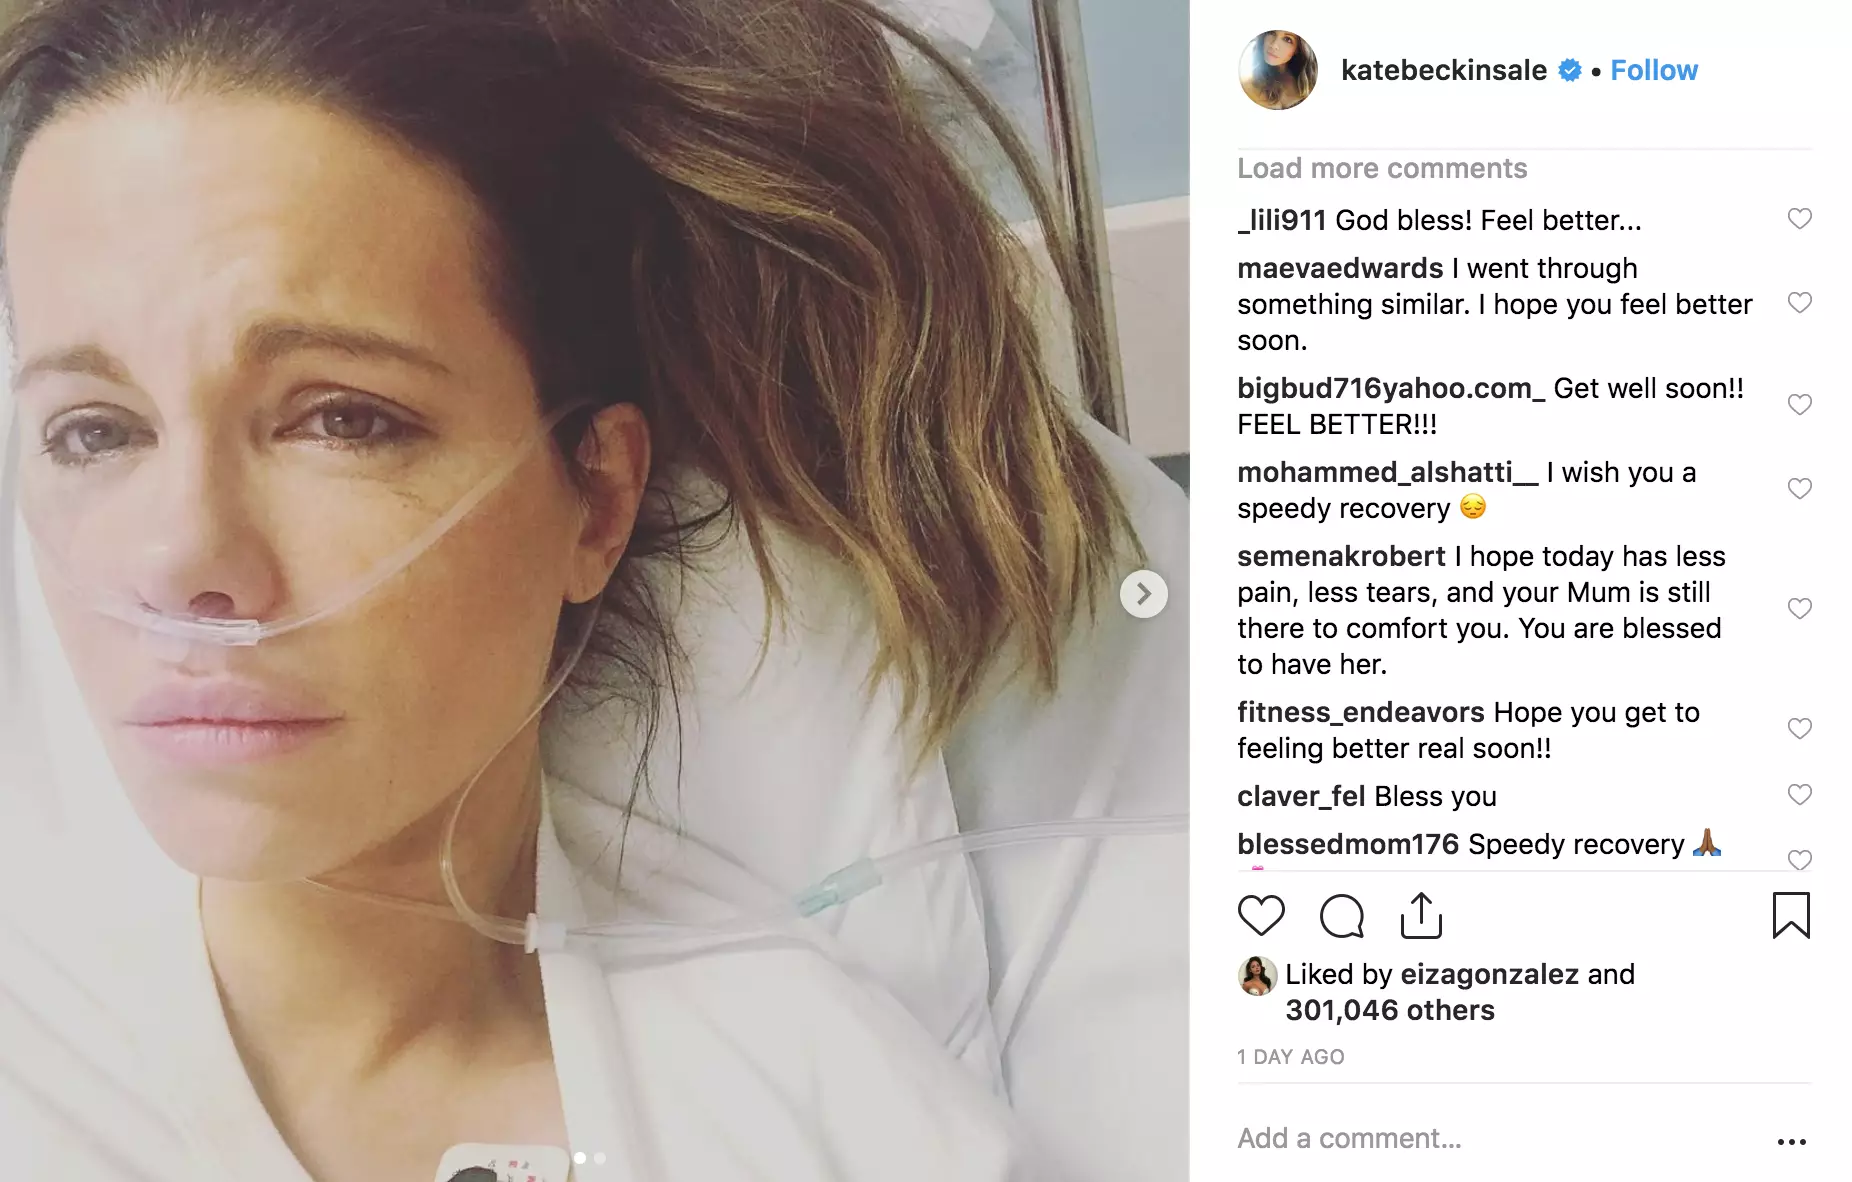 Kate Beckinsale, 45, wrote on Instagram that she suffered tremendous pain from ovarian cyst